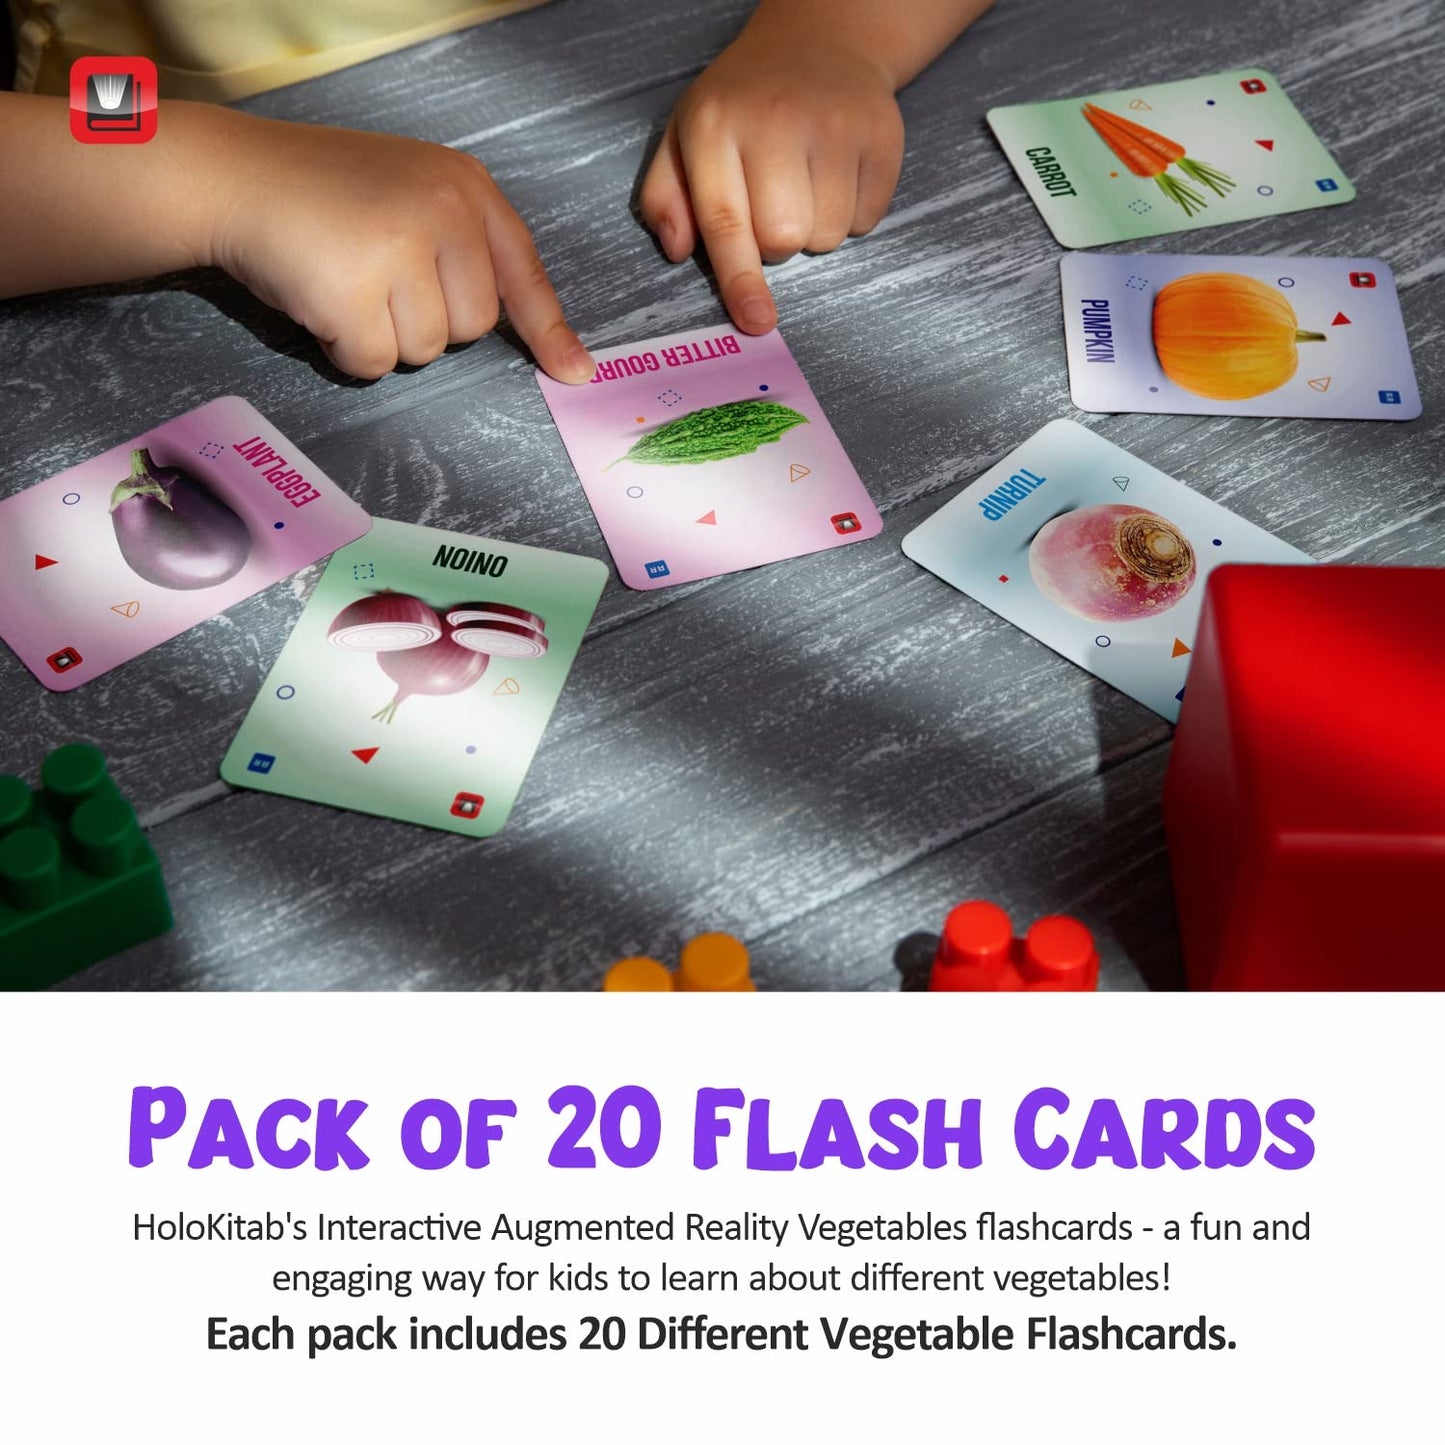 HoloKitab Augmented Reality Vegetable Flashcards Kit: 20 Laminated Cards with Real Illustrations | Ideal for Kindergarten